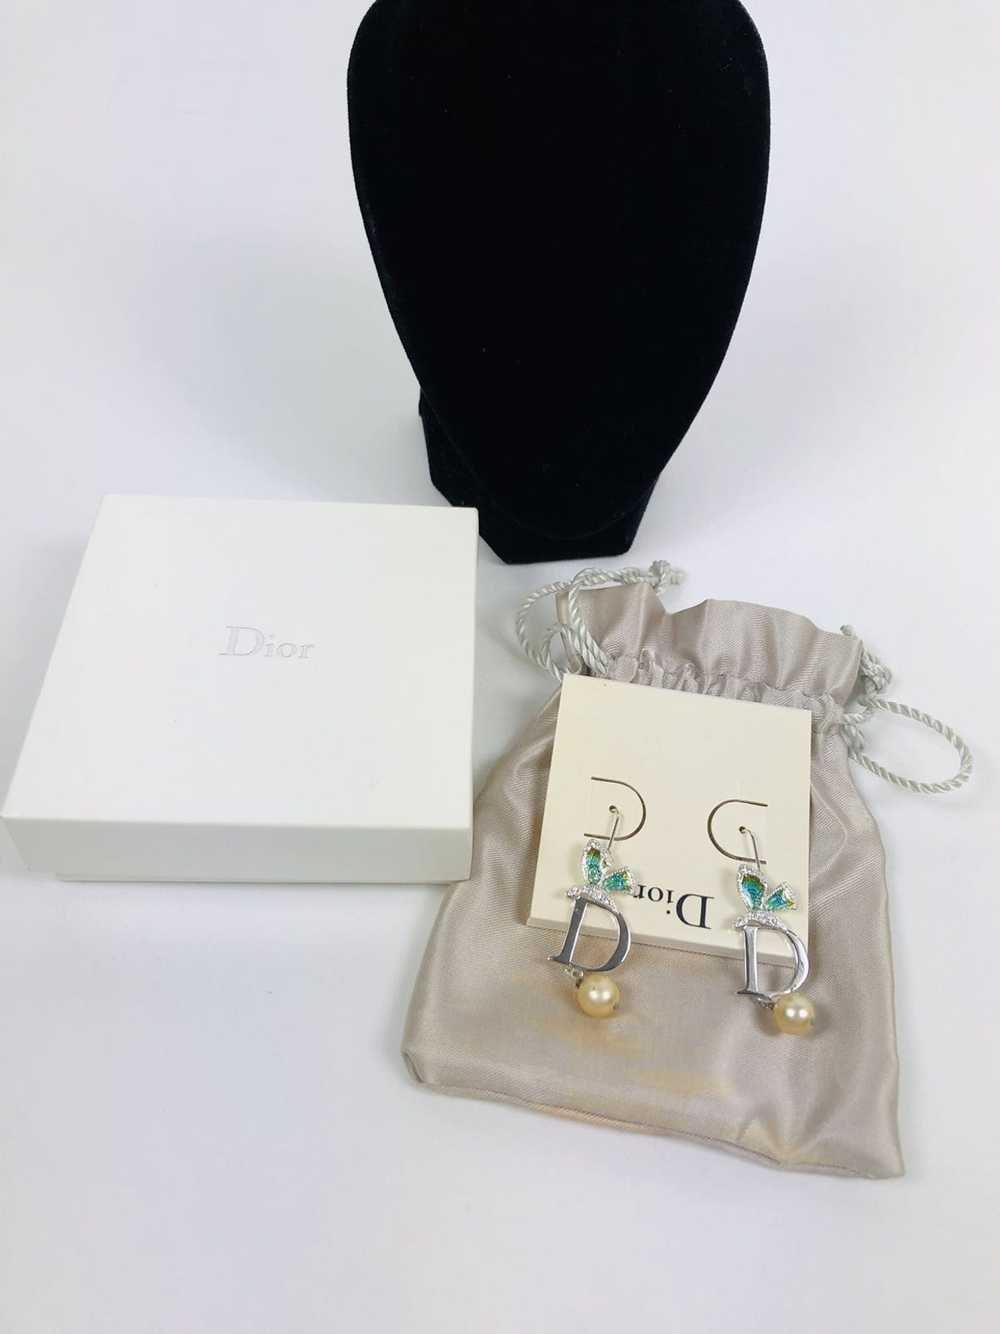 Dior Dior D butterfly ear rings - image 1